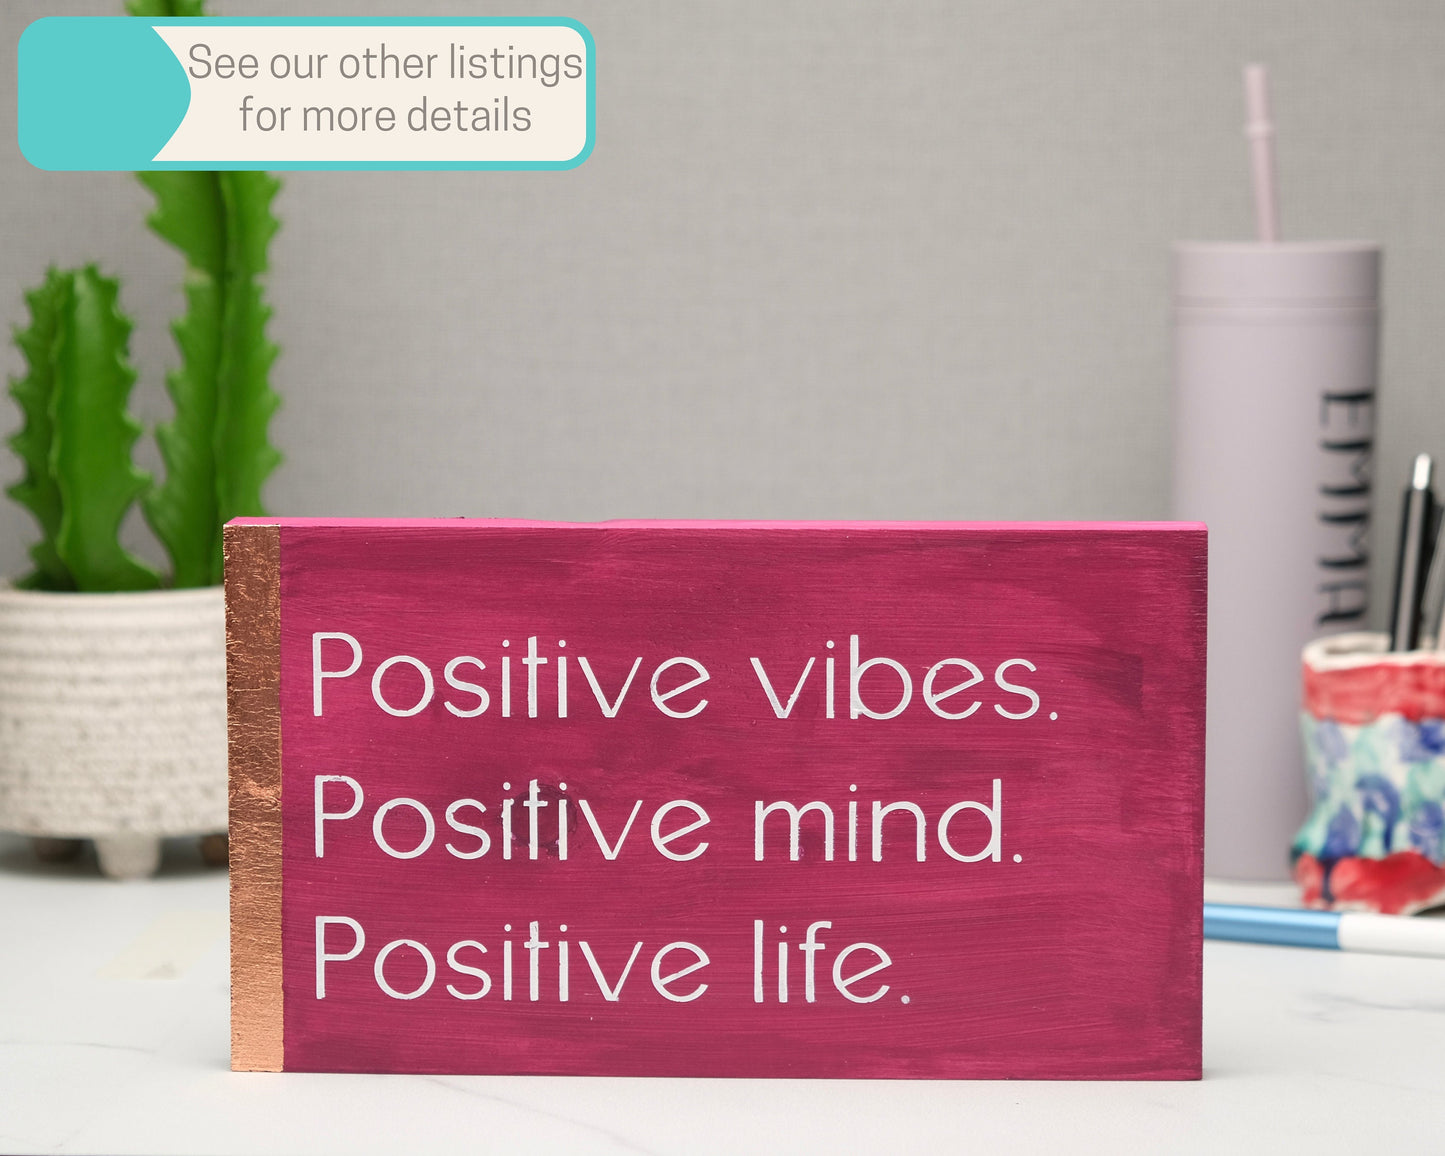 Positive Vibes, Positive Mind, Positive Life, custom wood block sign, inspirational quote, self care home decor, gift for her, gift for him